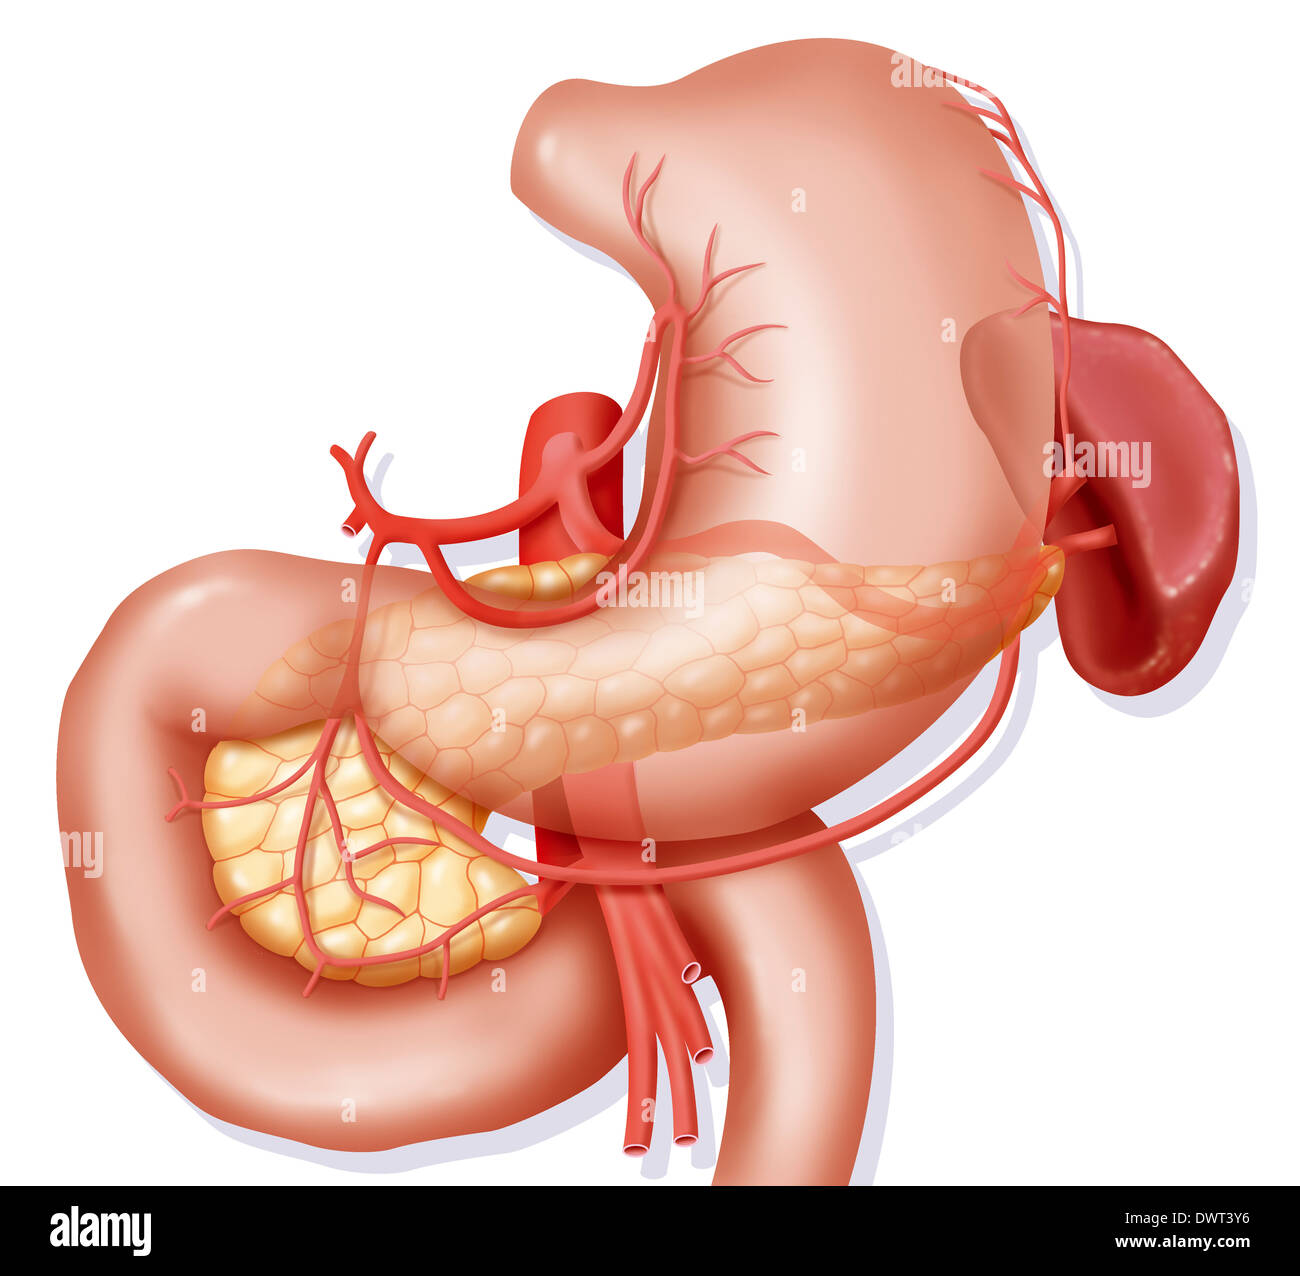 Stomach, drawing Stock Photo